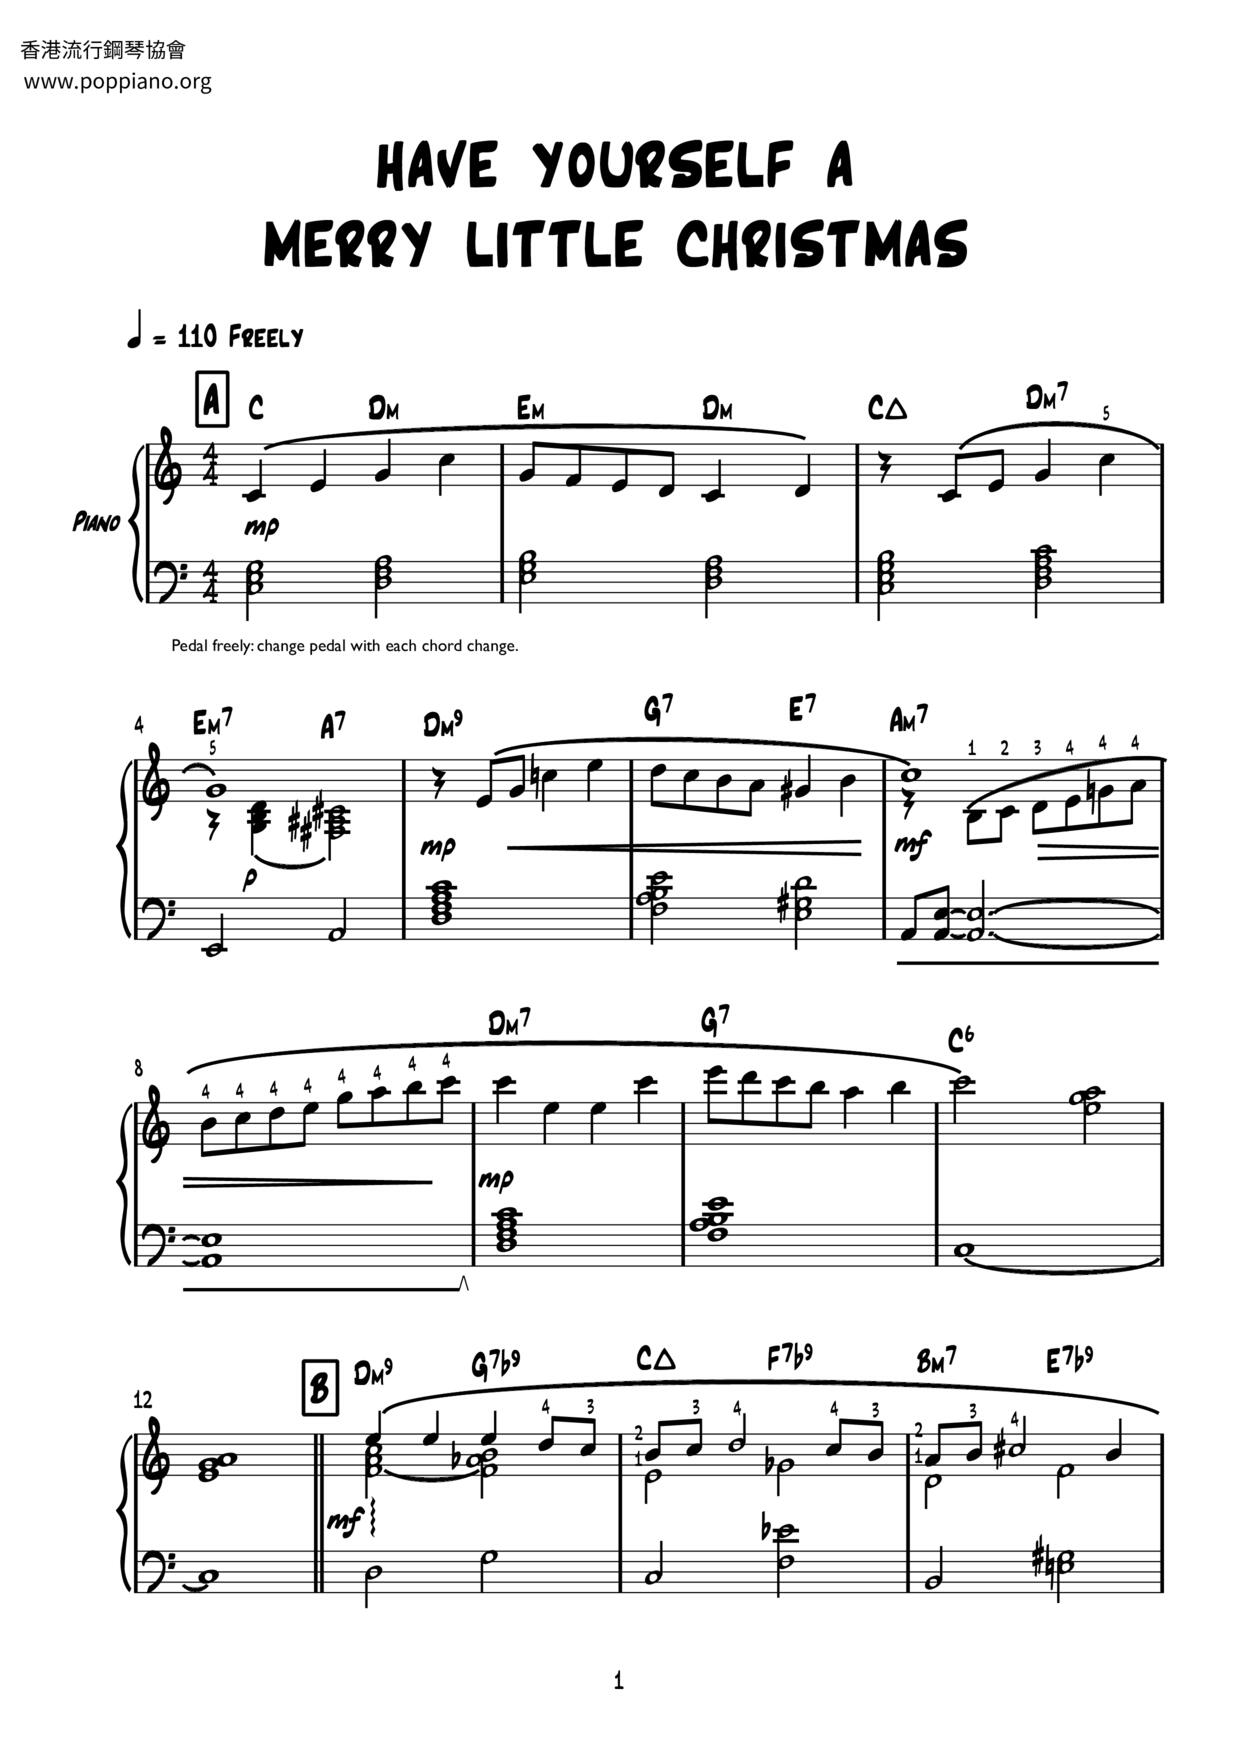 Have Yourself A Merry Little Christmas (Hugh Martin) Score